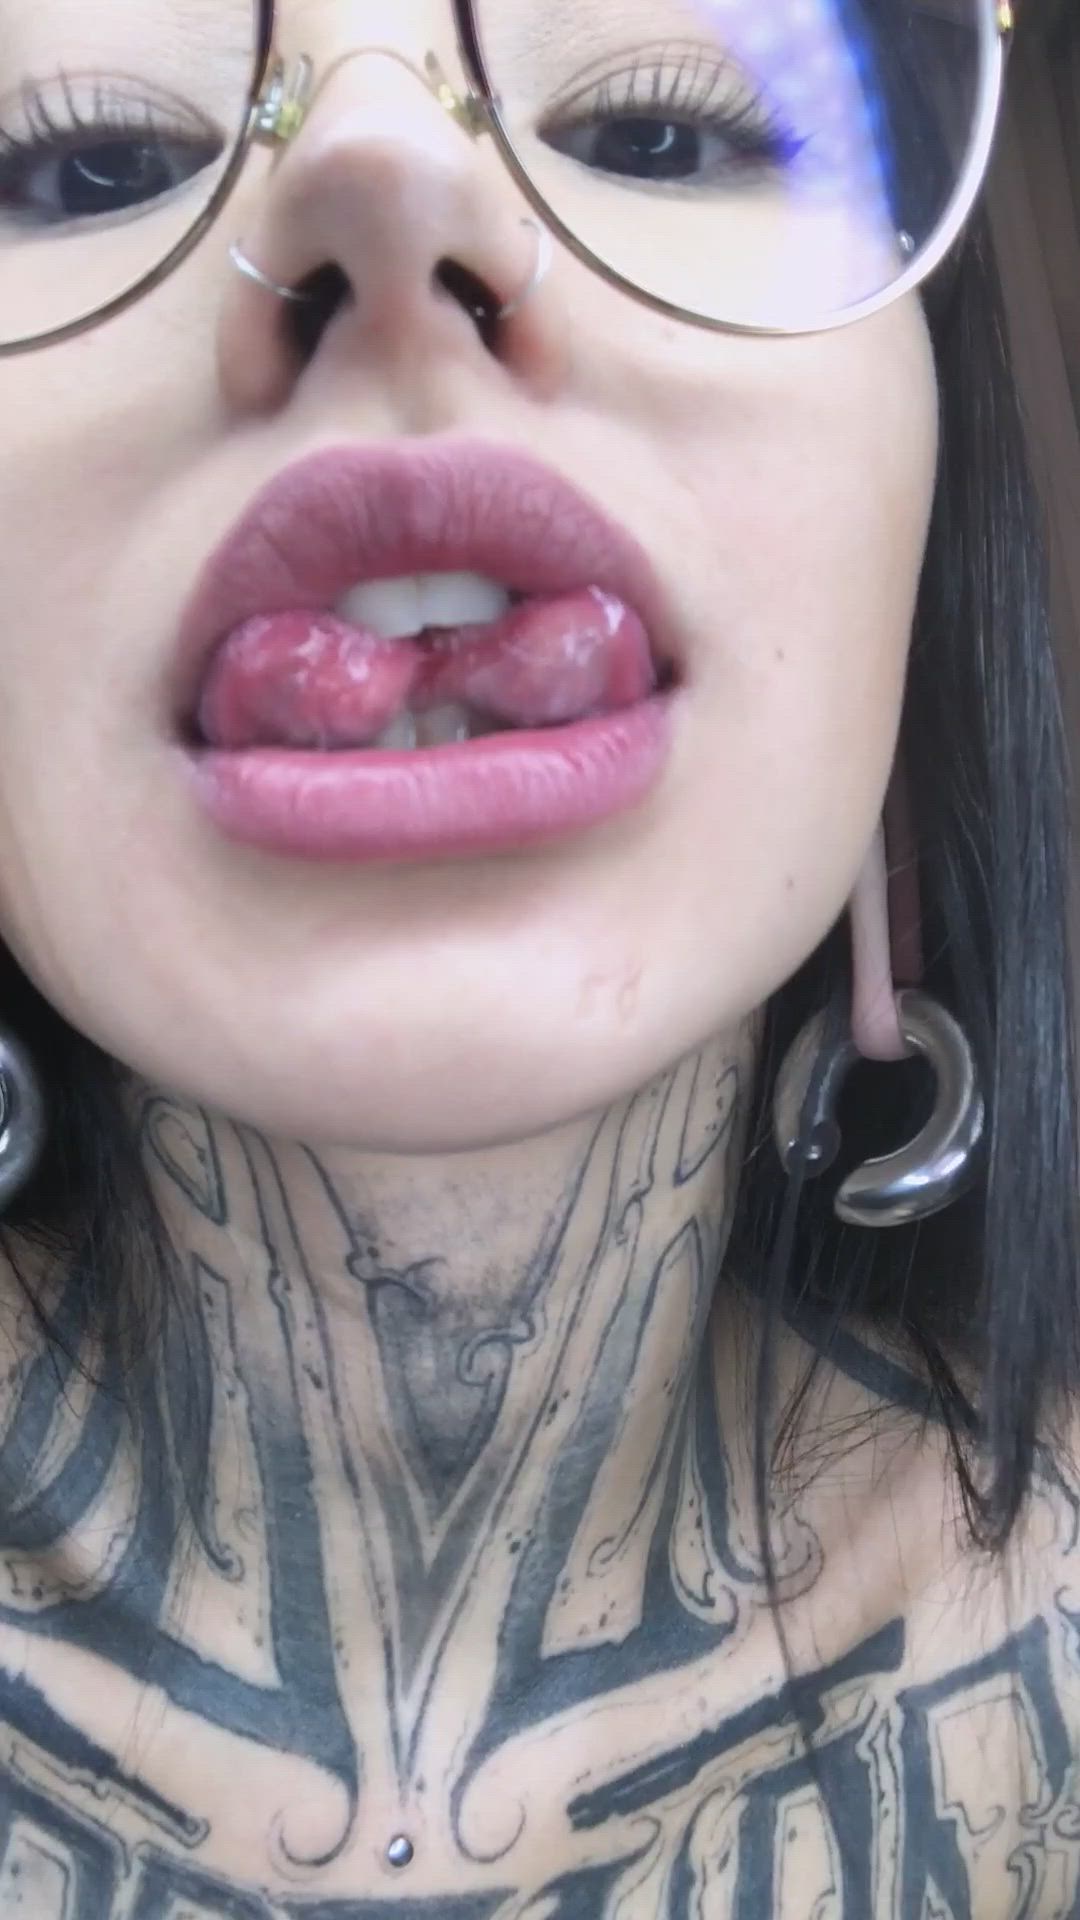 Big Tits porn video with onlyfans model Surya Sparrow 🖤 <strong>@surya.sparrow</strong>